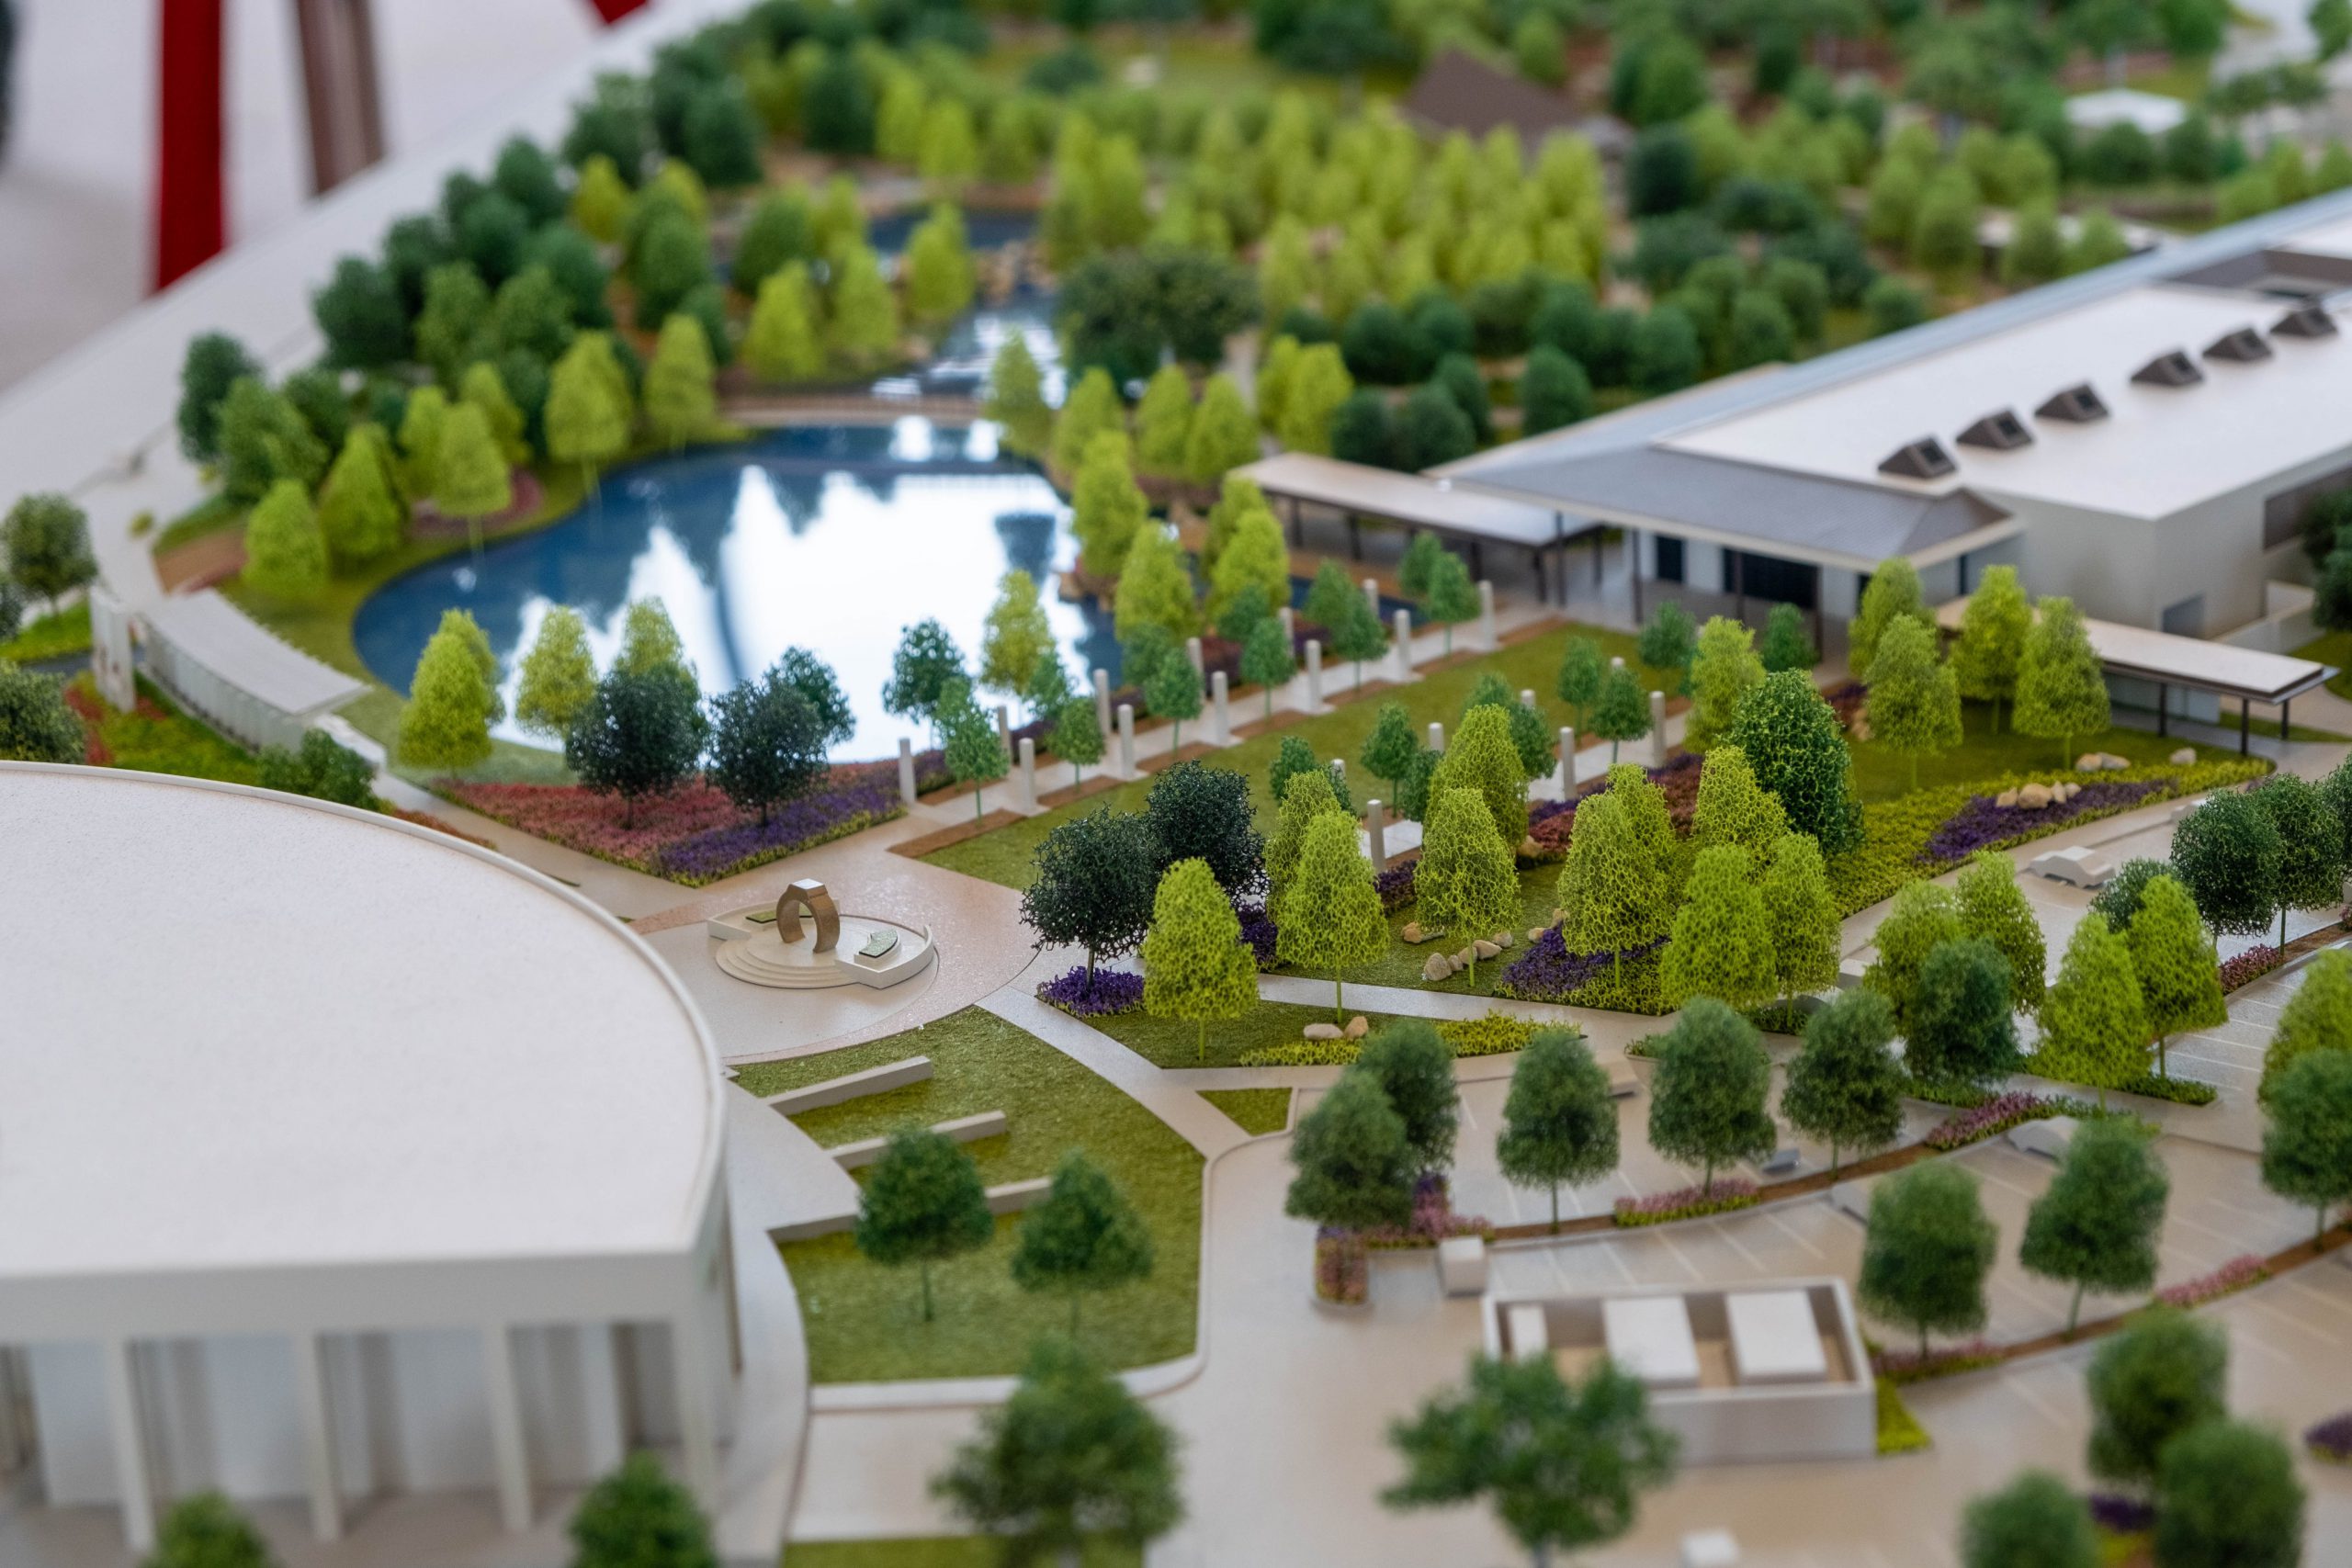 Rendered image of Aggie Park